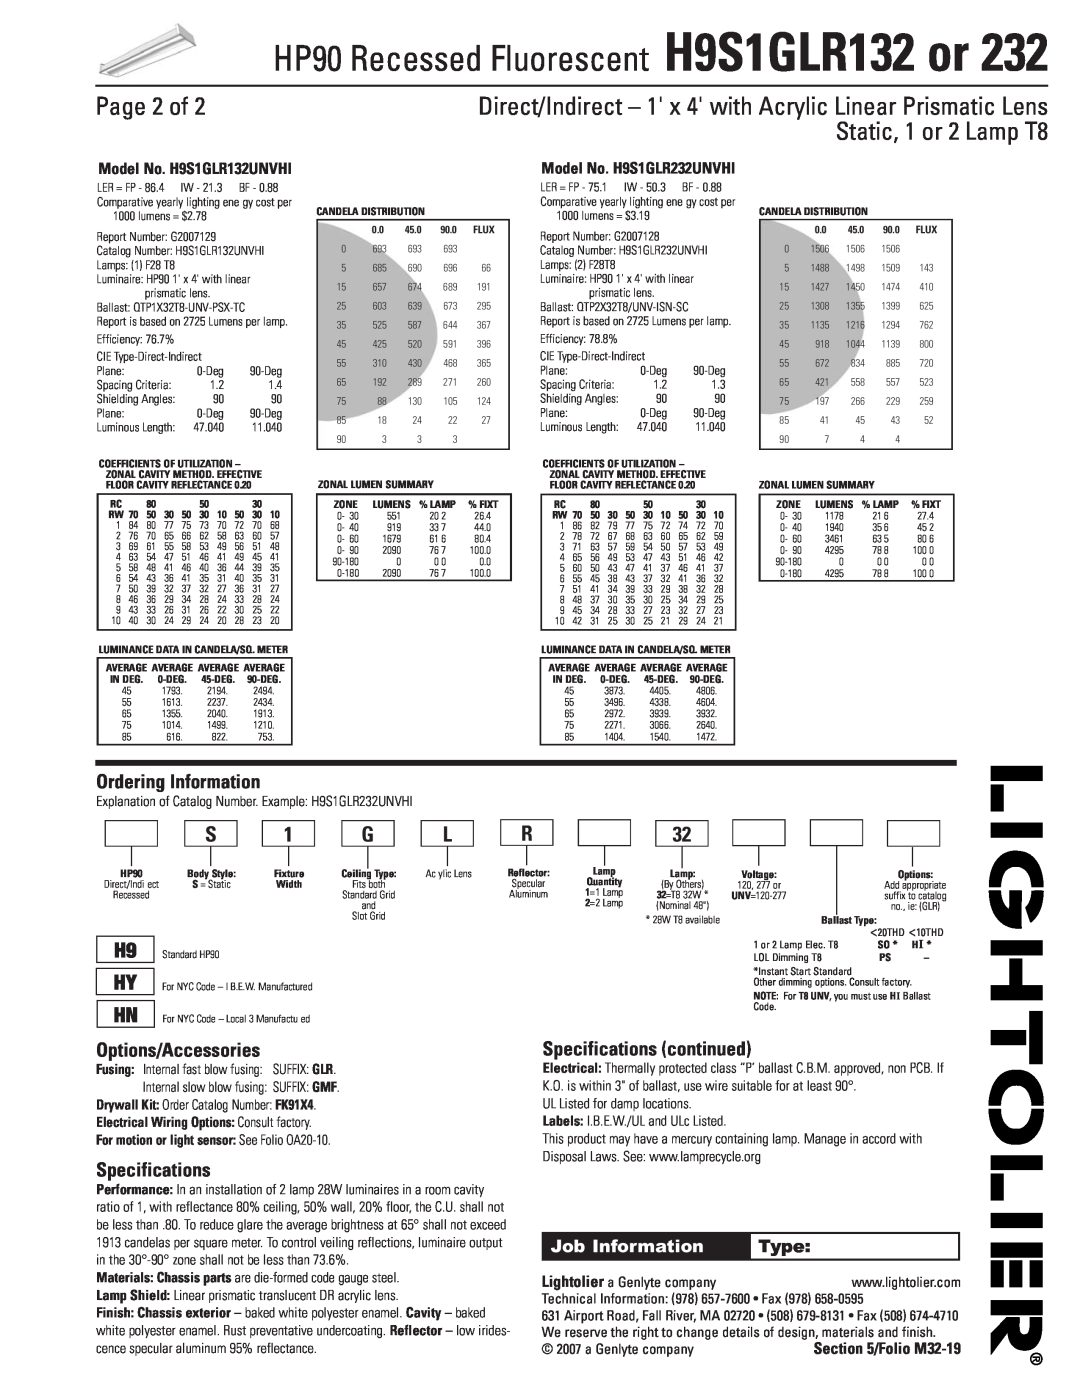 Lightolier Page 2 of, Ordering Information, Specifications continued, HP90 Recessed Fluorescent H9S1GLR132 or, Type 